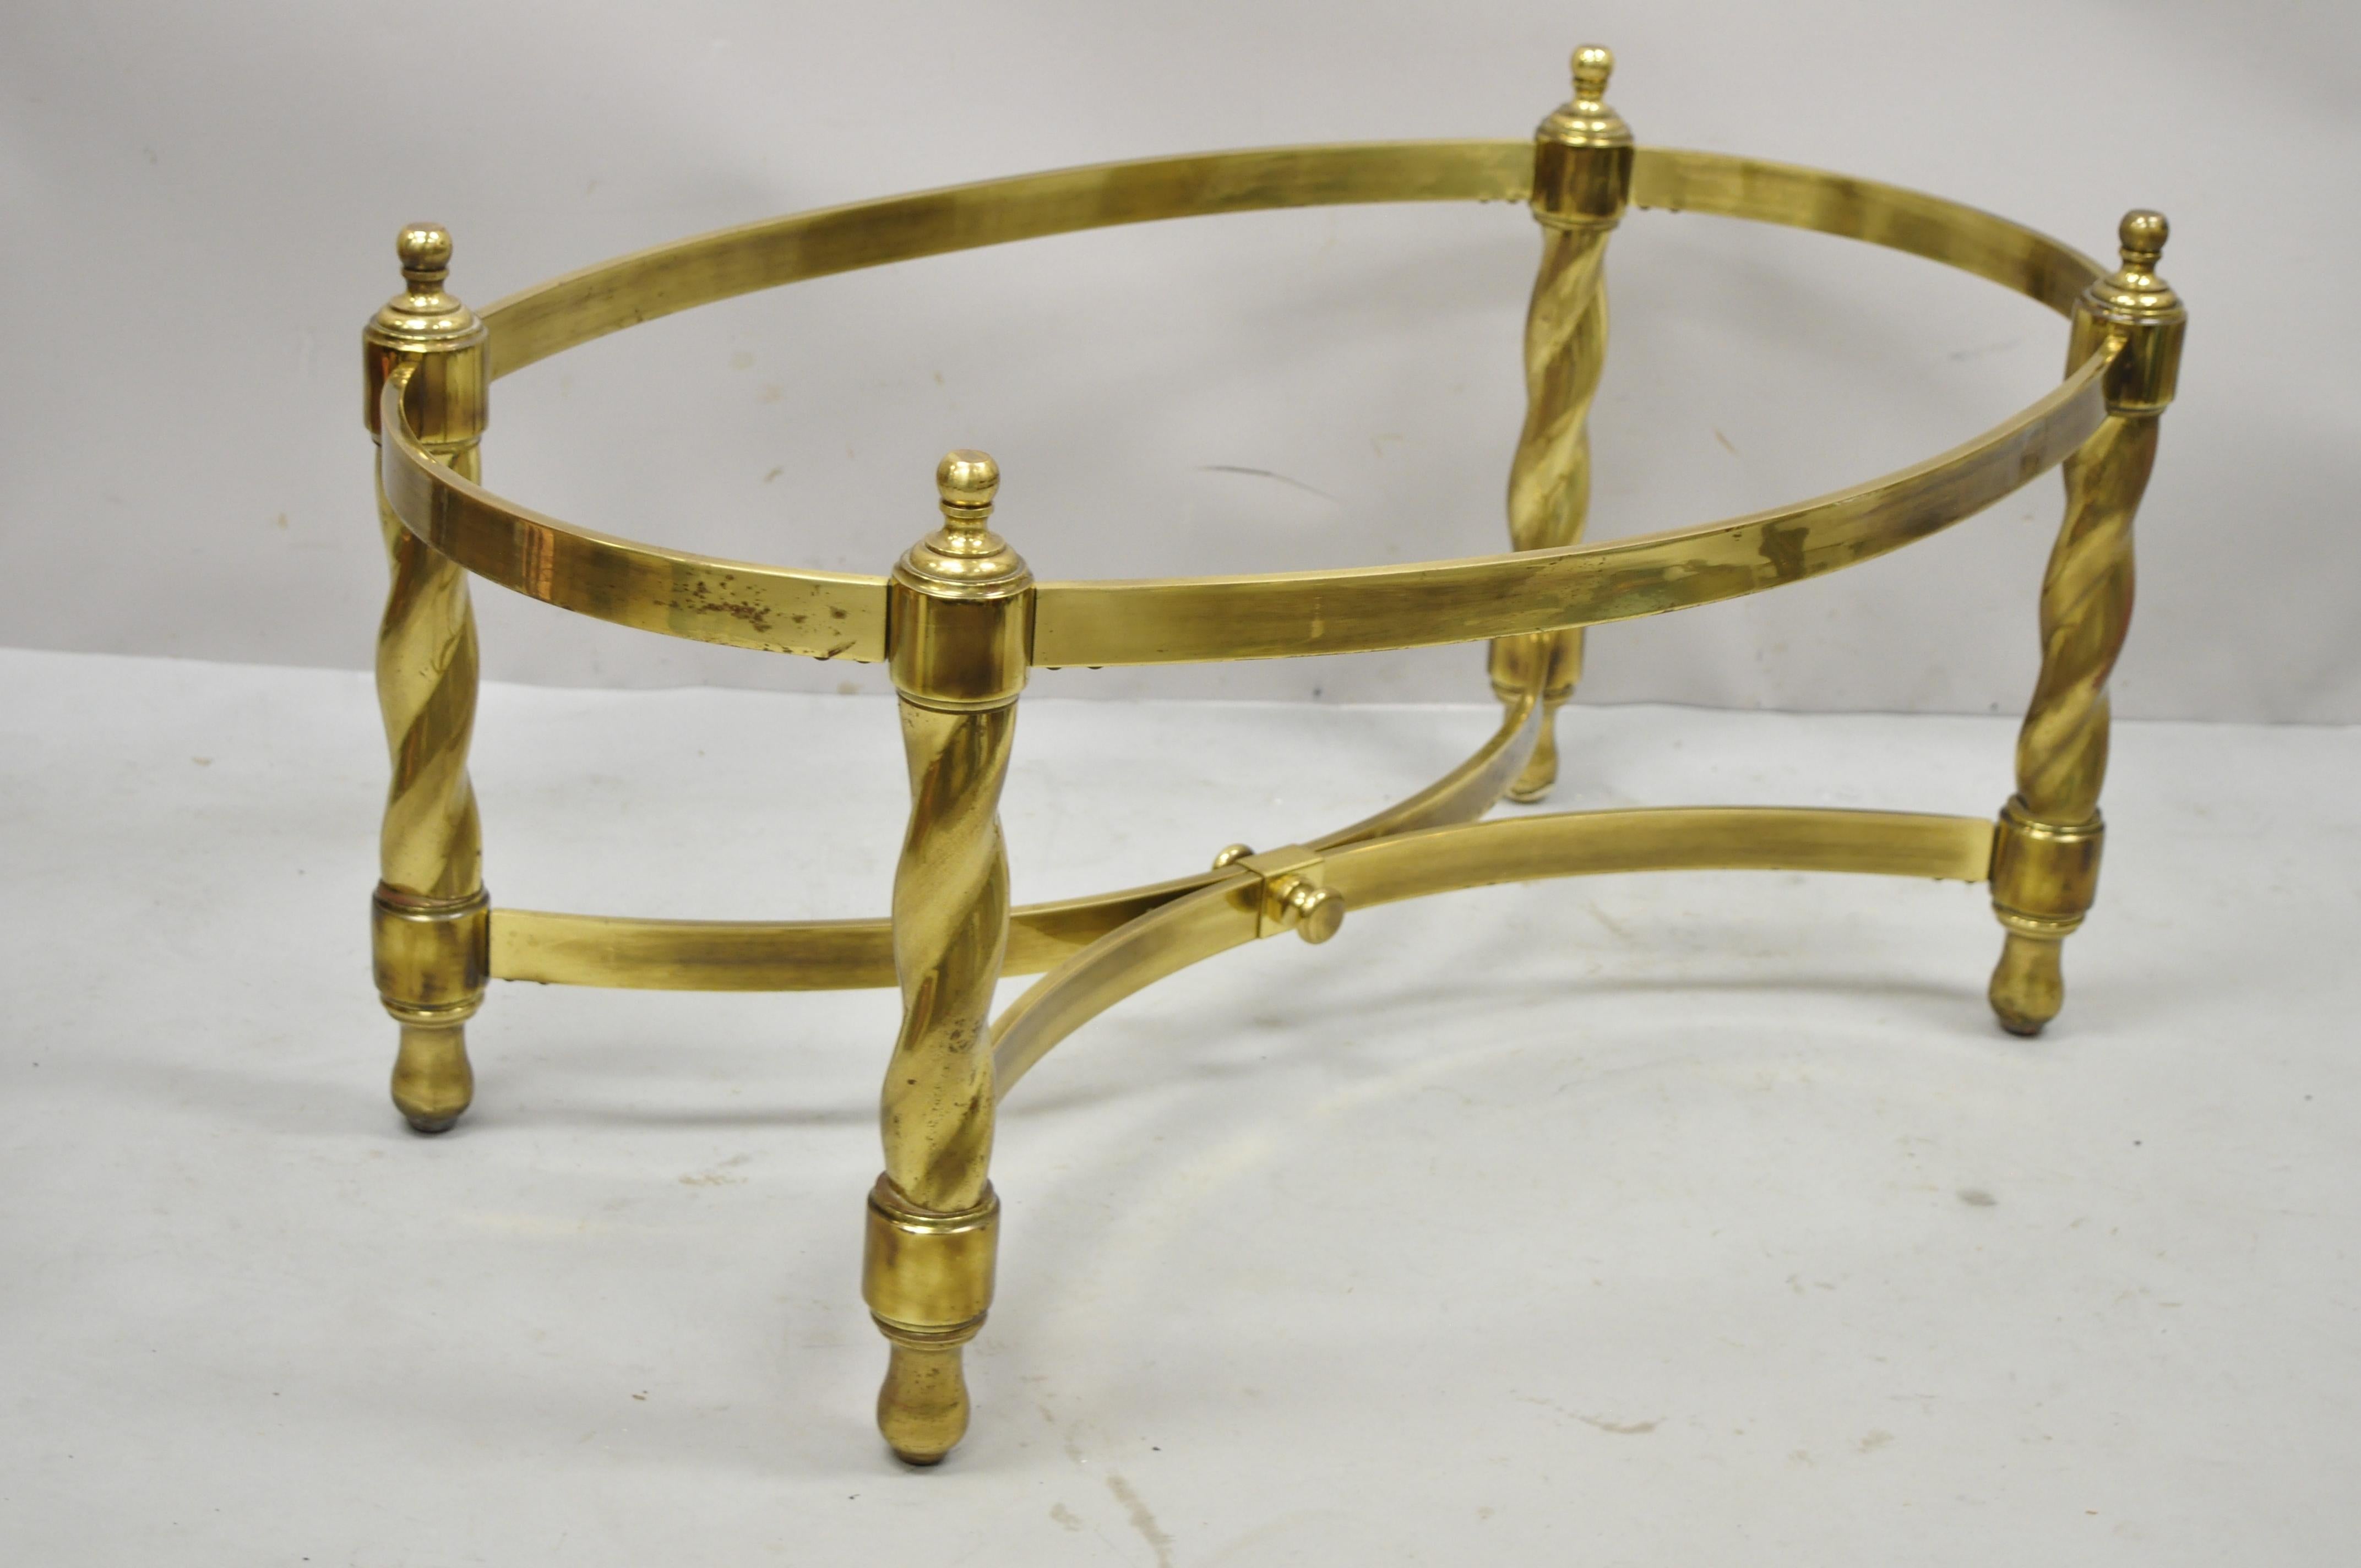 Vintage brass Hollywood Regency spiral twist oval coffee table base attr. Mastercraft. Item features spiral turned legs, stretcher base, oval shape, brass construction, very nice vintage item, quality Italian craftsmanship, great style and form,